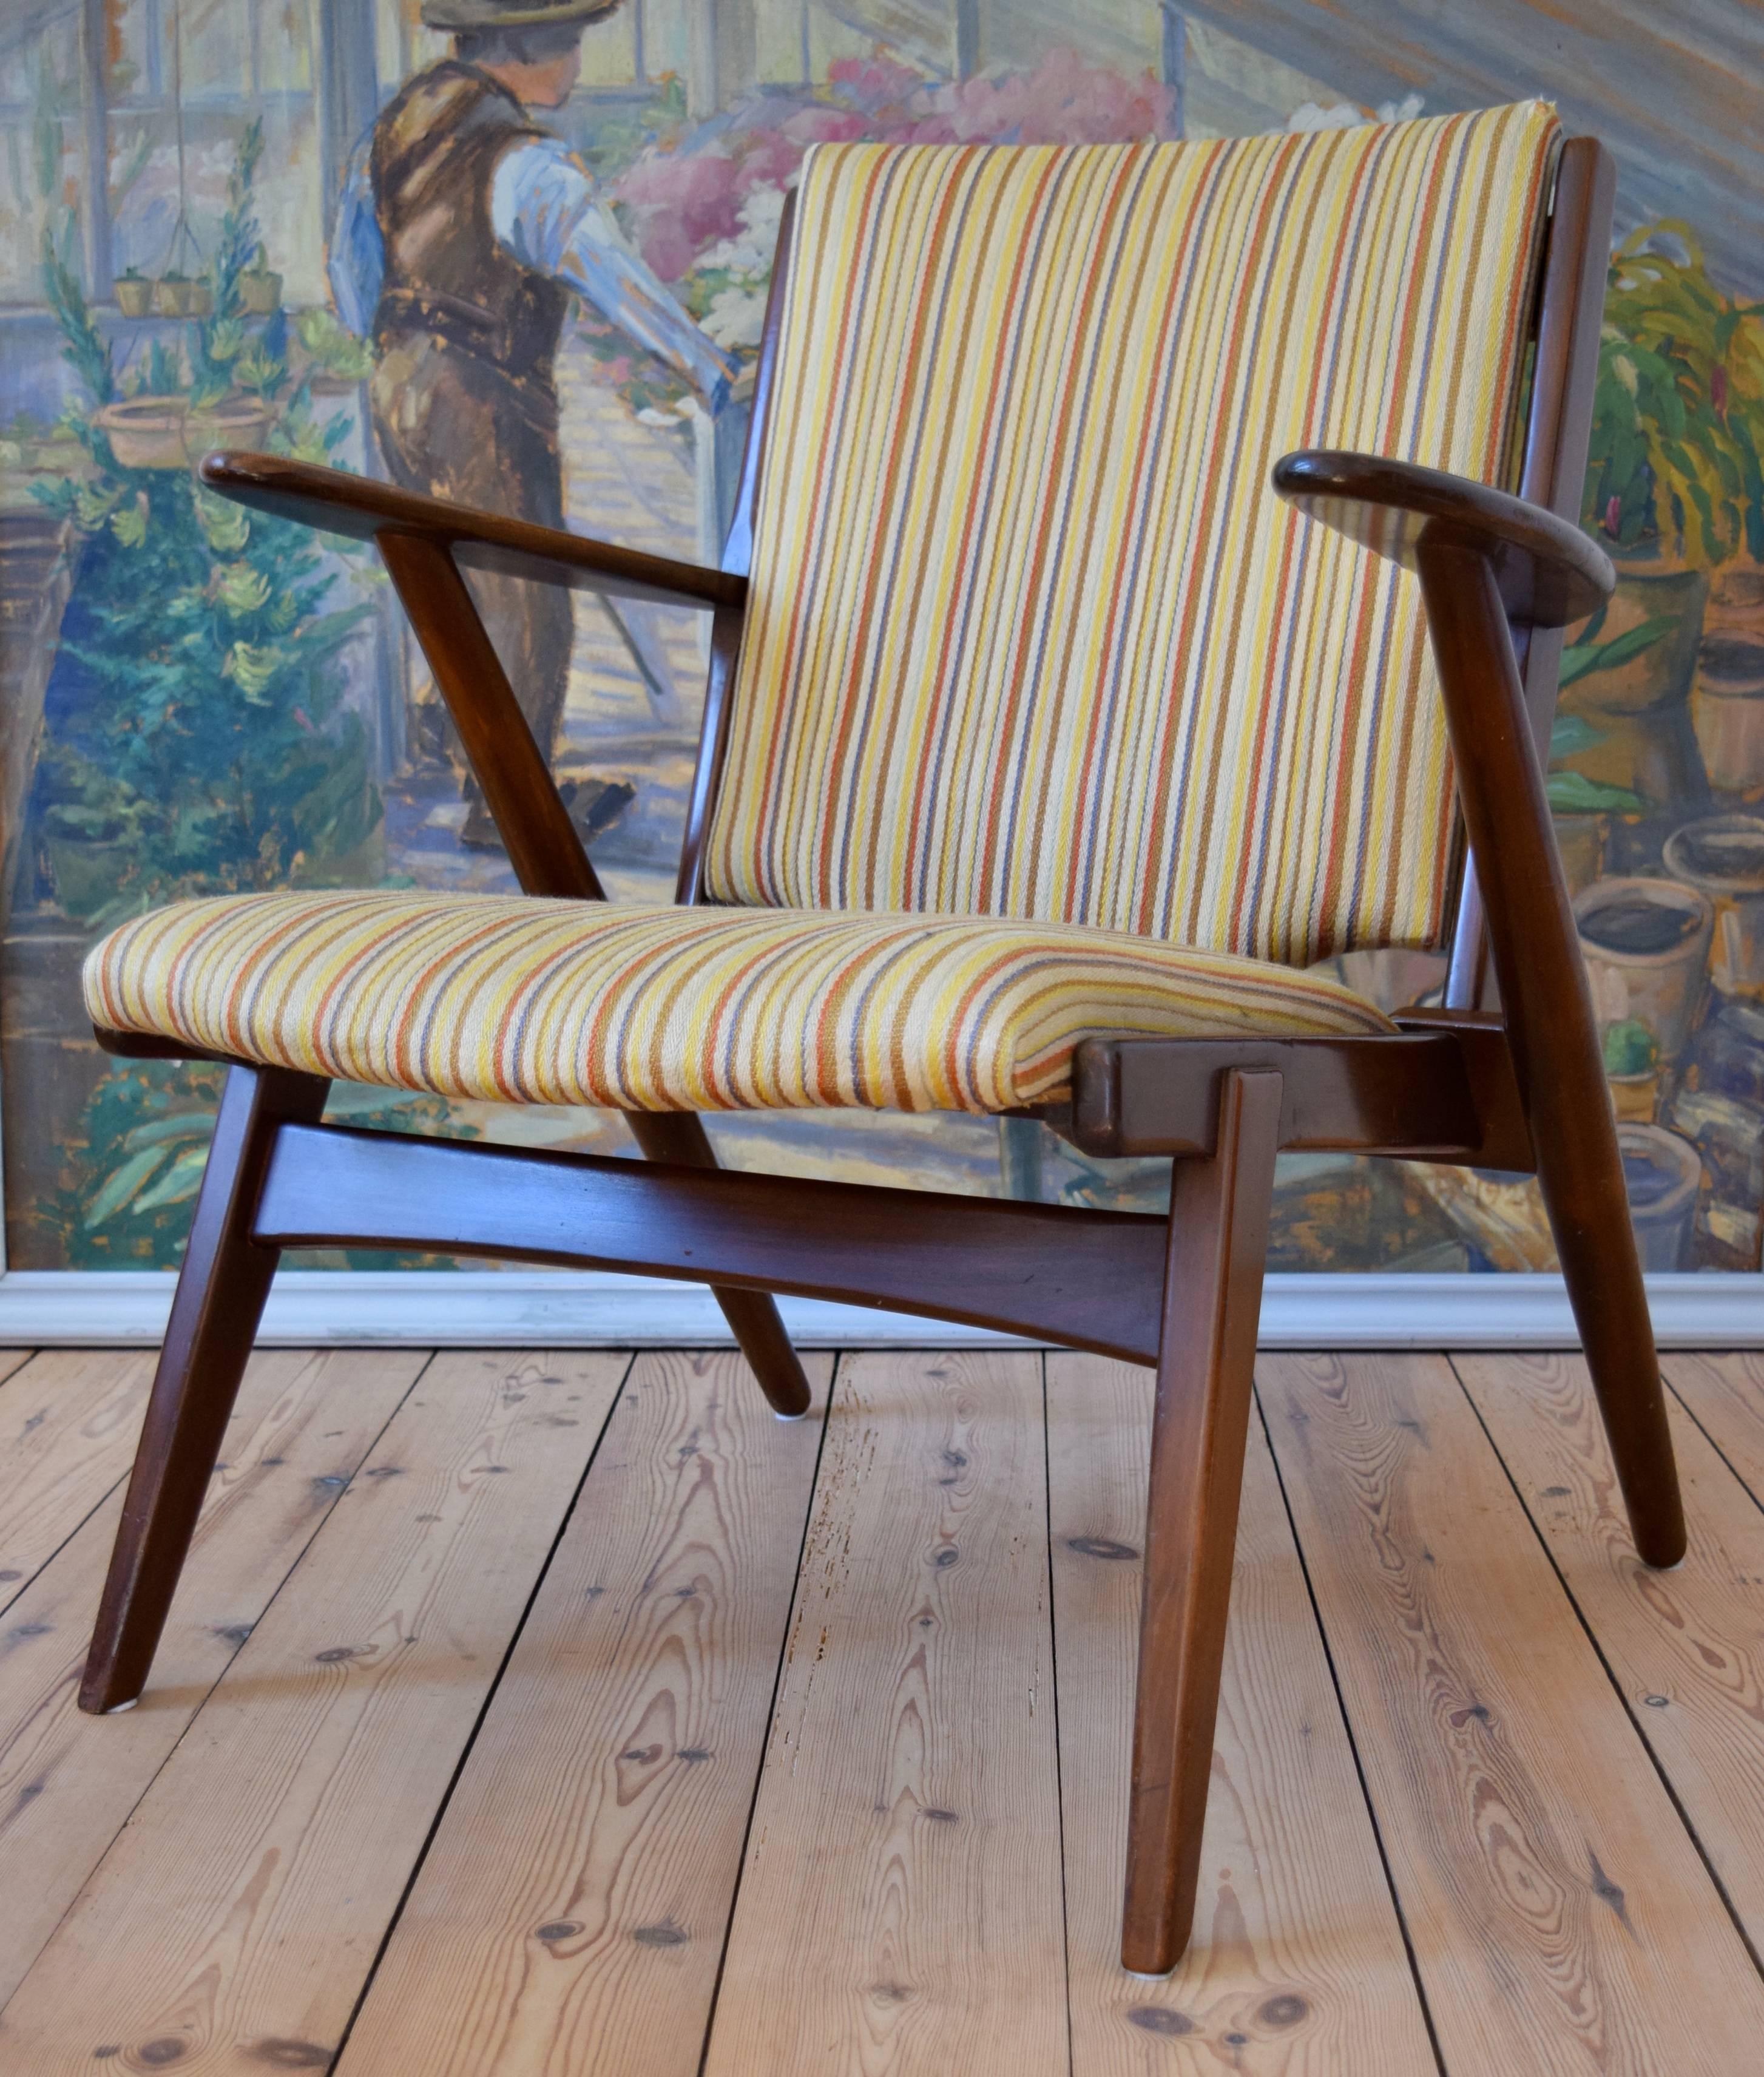 Midcentury Danish lounge designed by Arne Wahl Iverson for Hans Hansen & Sons, Odense. This chair is in beech with paddle armrests and is covered in the original striped fabric. Reminiscent of similar designed by Hans Wegner and Poul Volther, having